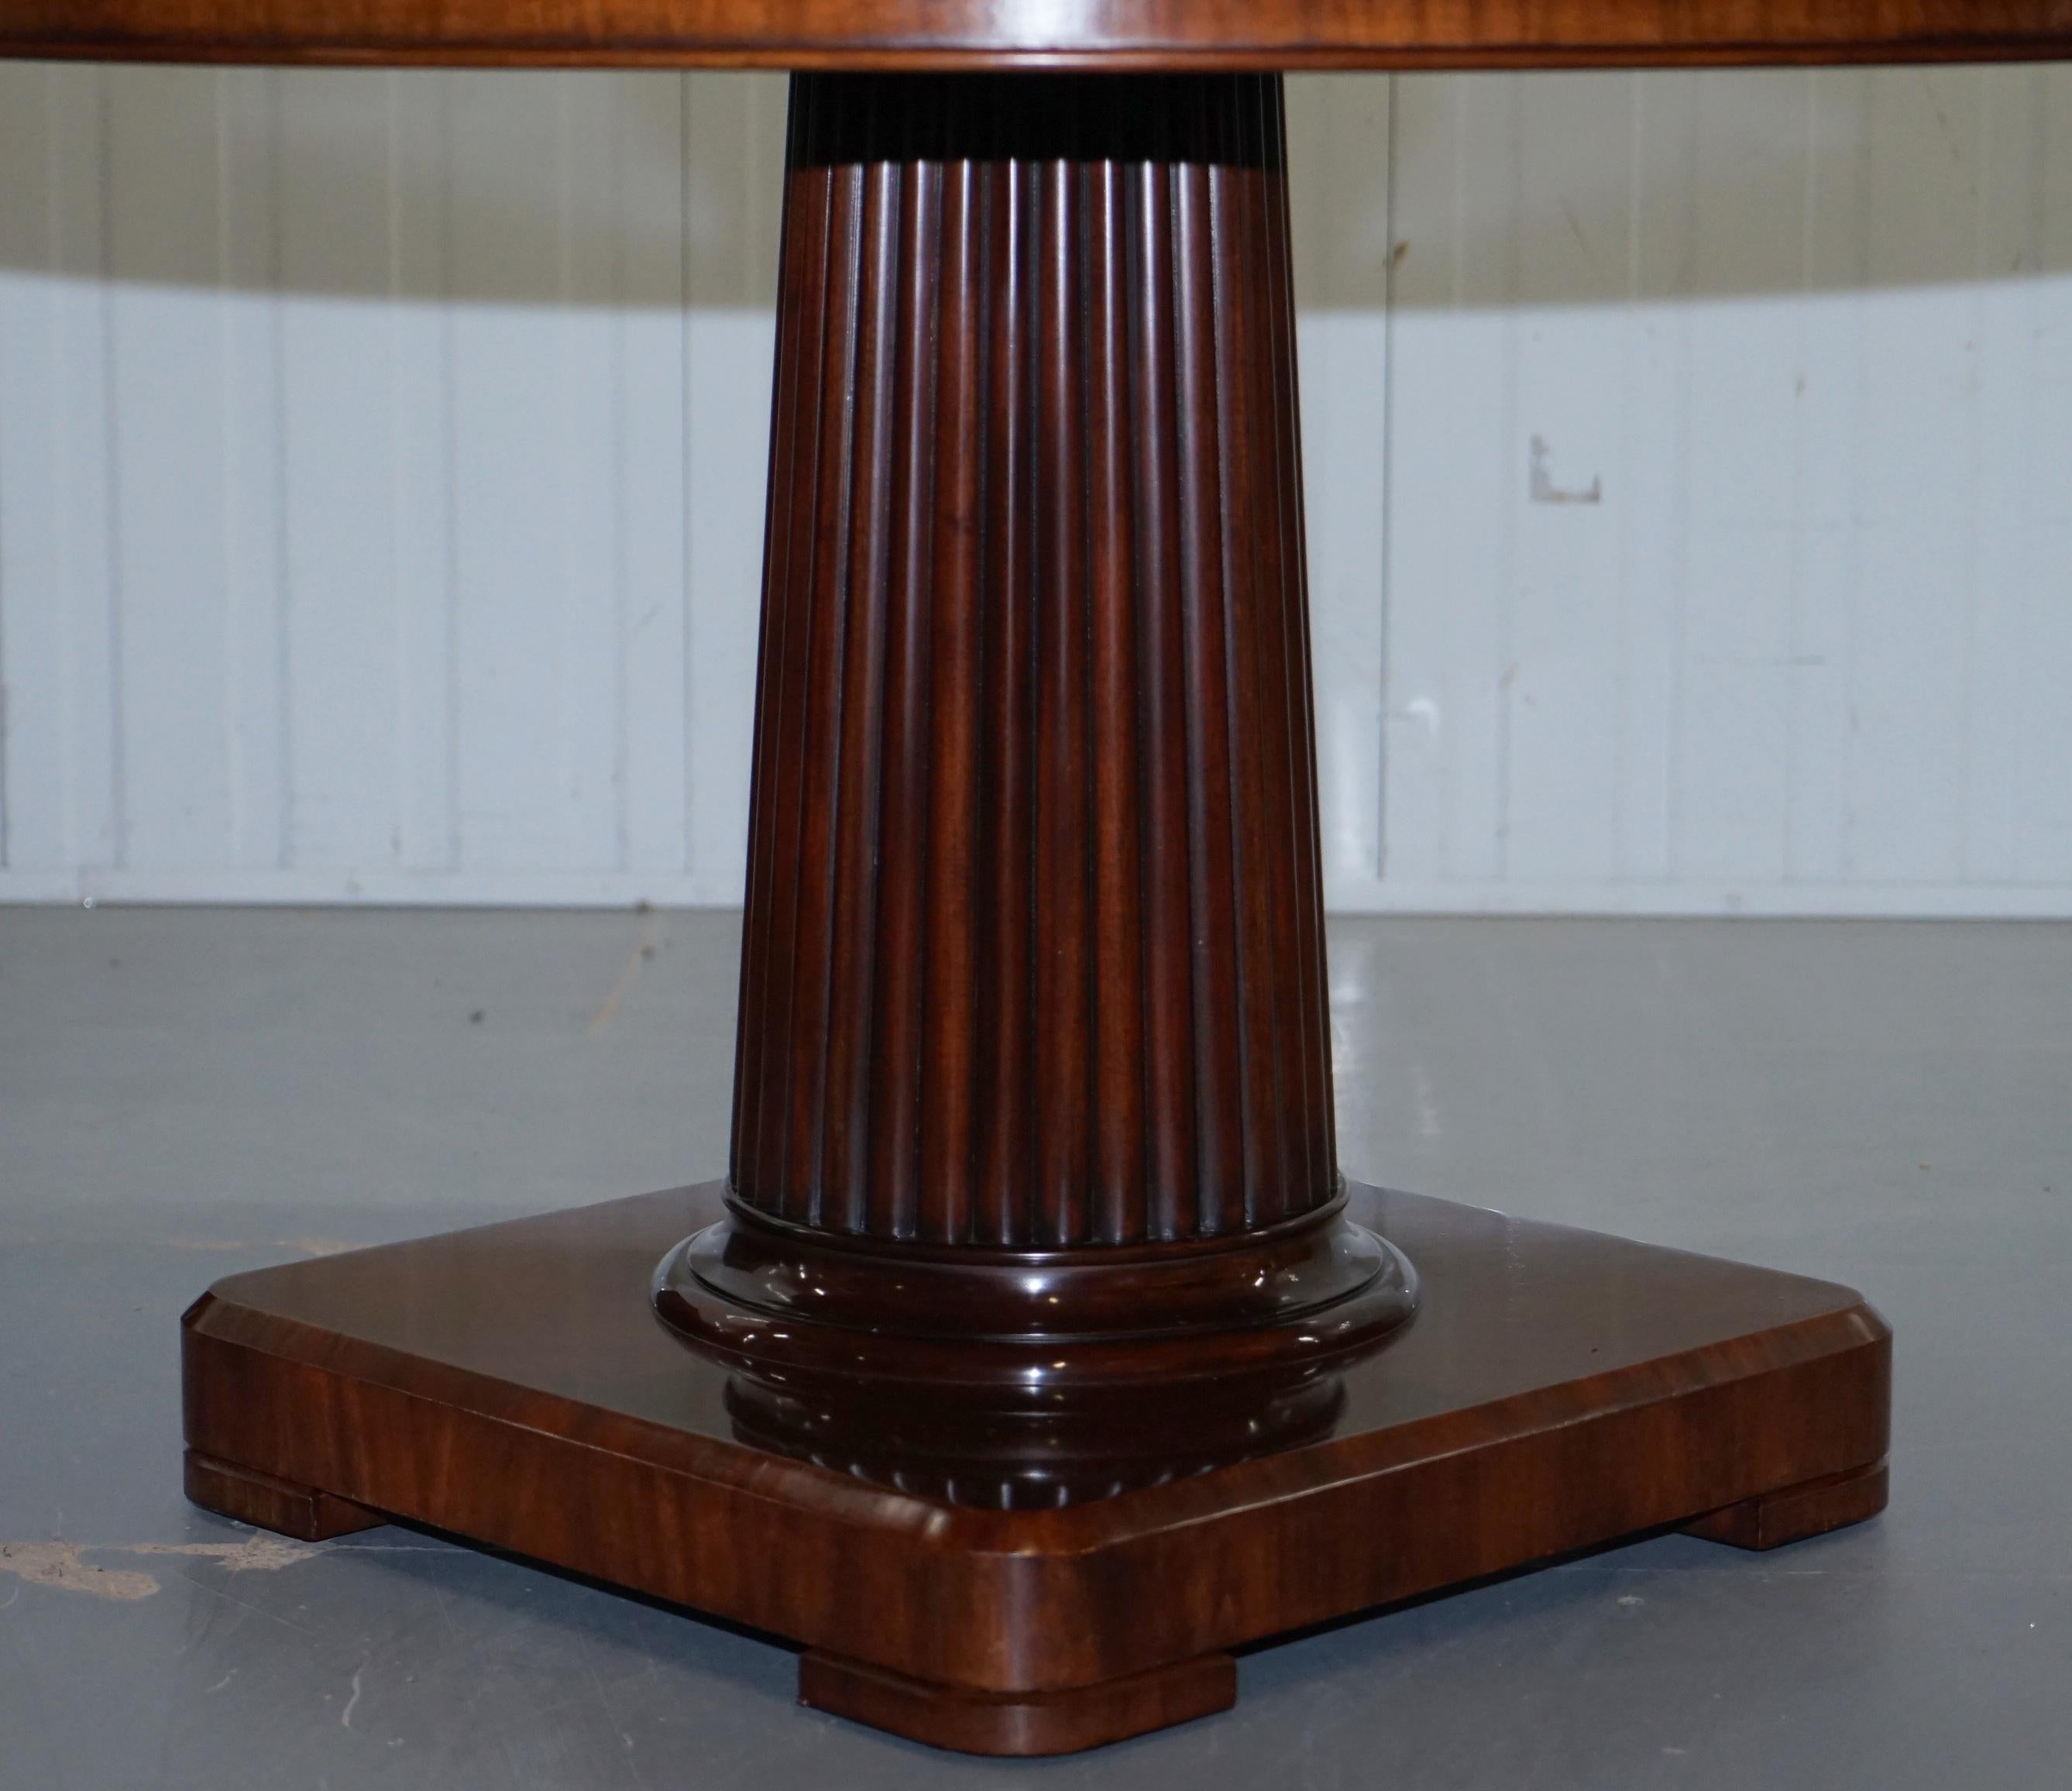 We are delighted to offer for sale this stunning Ralph Lauren Mayfair classic mahogany dining occasional centre table RRP £8000

The table is a very high-quality grade of mahogany, it has stunning patina throughout, the top is veneered in a sun